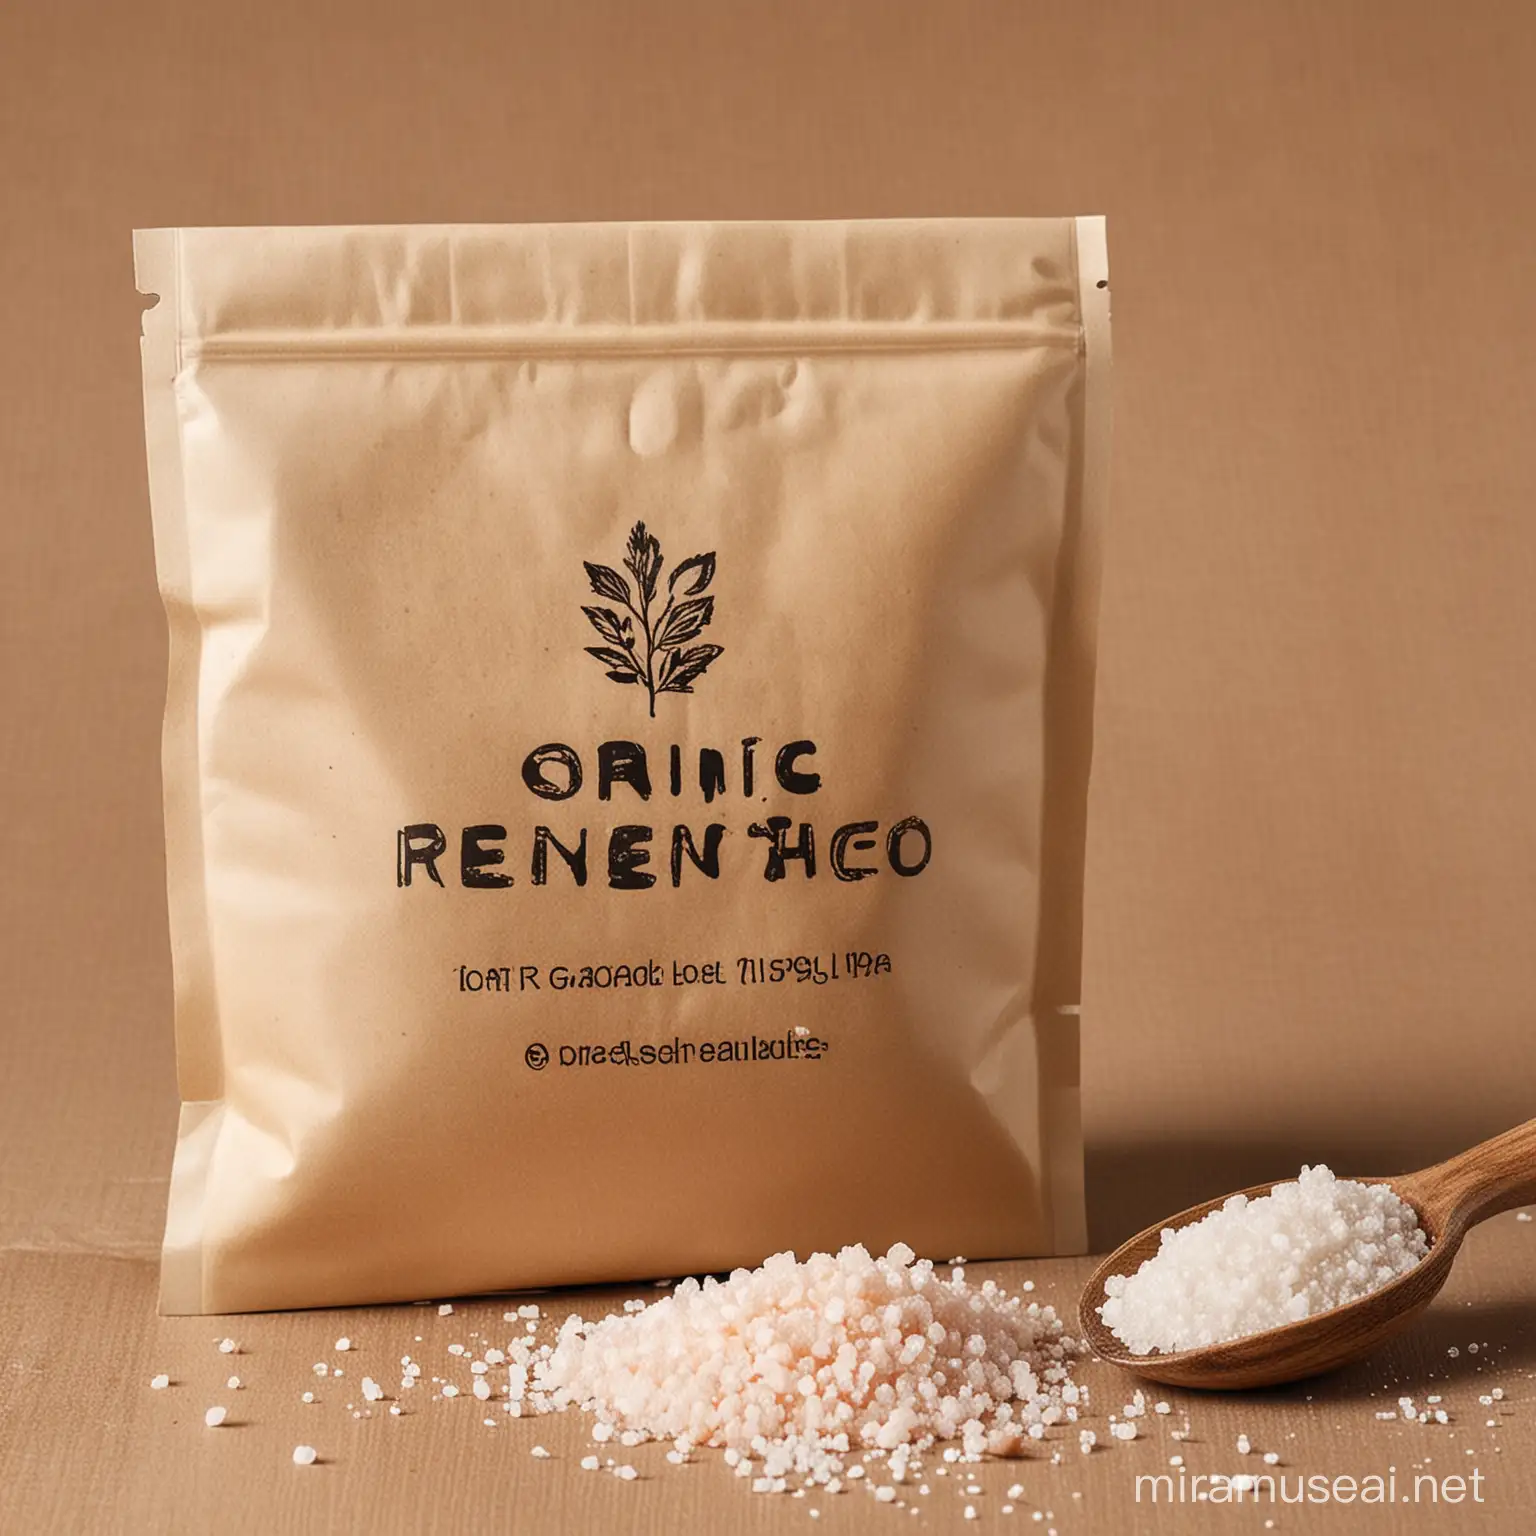 opening a natural product supplies like epson salt and looking for natural eco frandly packaging with natural look. name for logo- Organic boutique, pure earth essentials, natural wellness, natural blossom, bloom natural products.